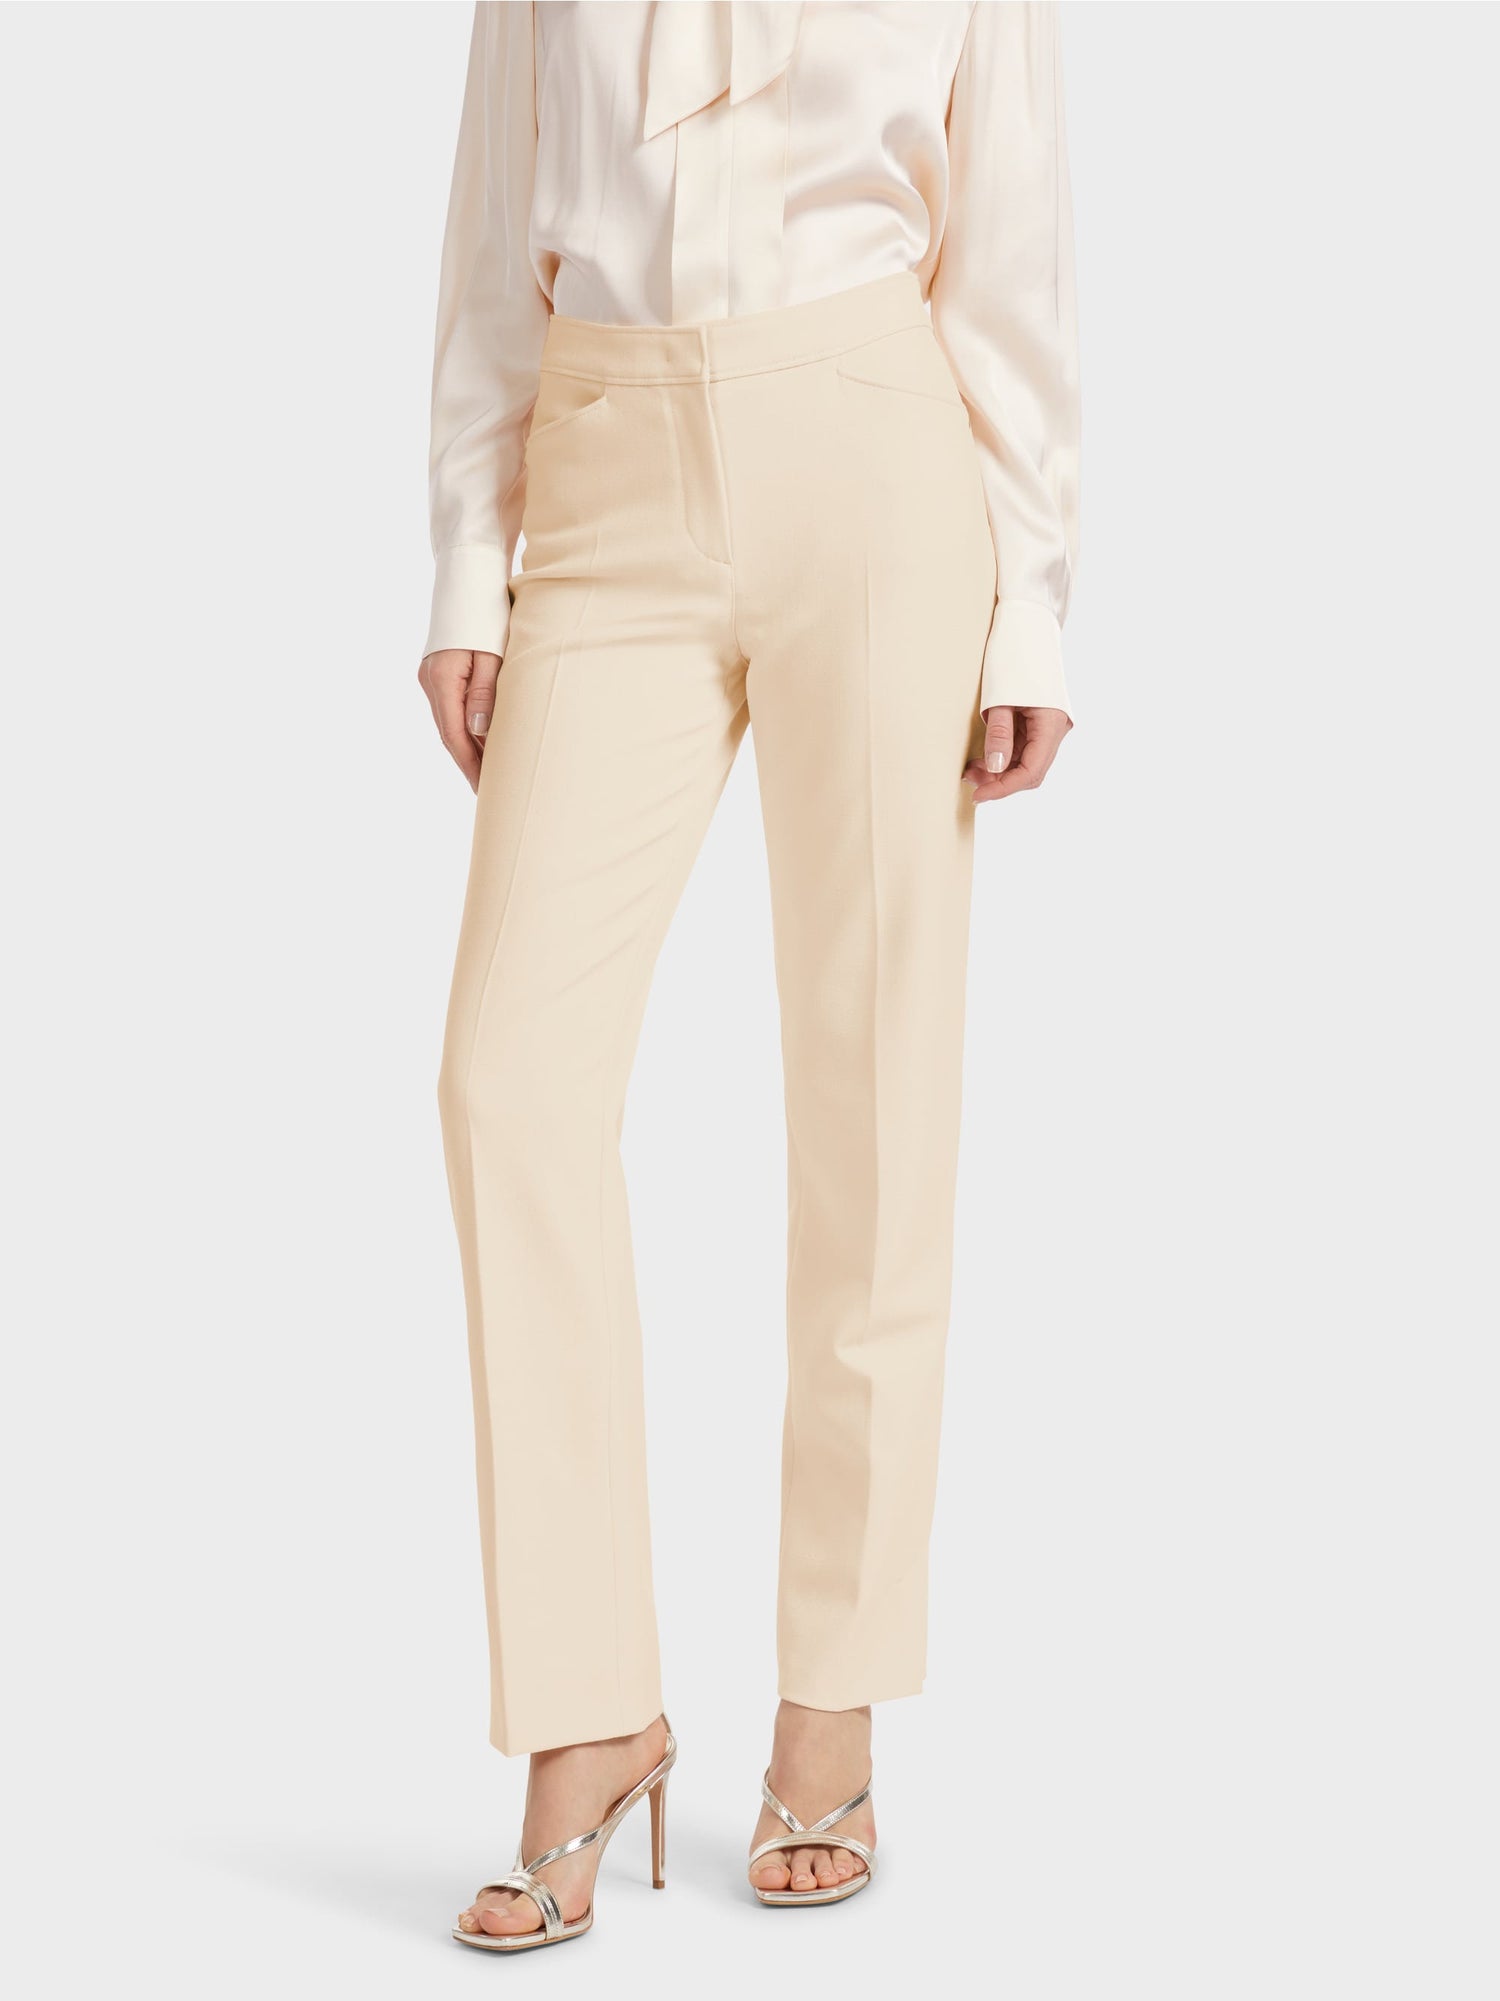 Fendou Stretch Pants With Crease_VC 81.42 W09_116_04